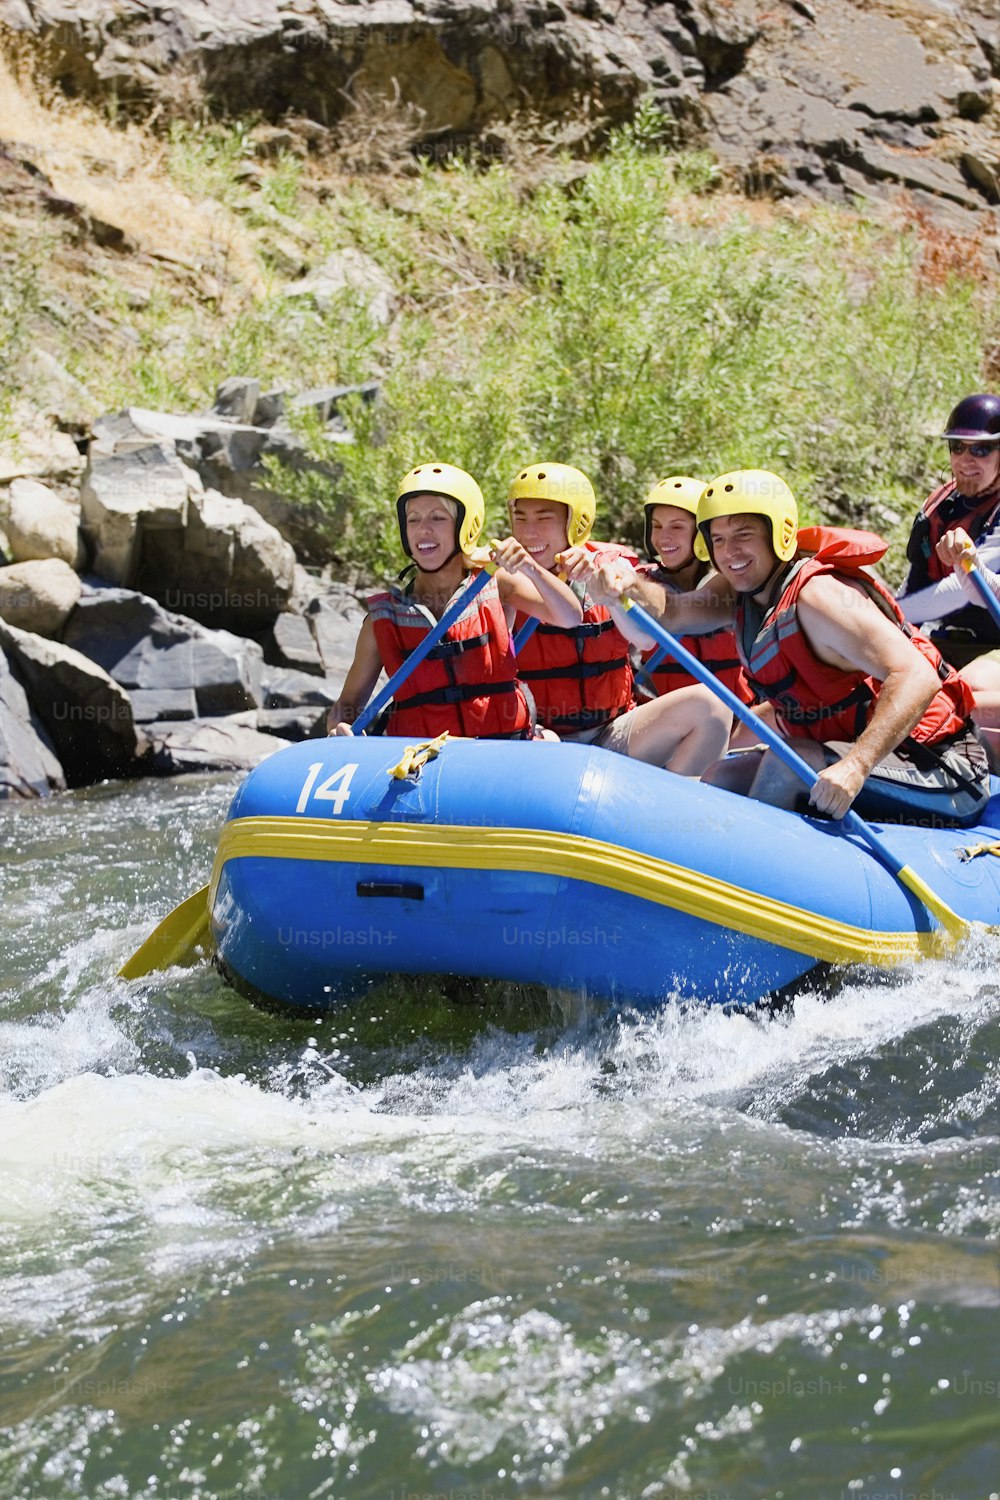 a group of people riding a raft down a river